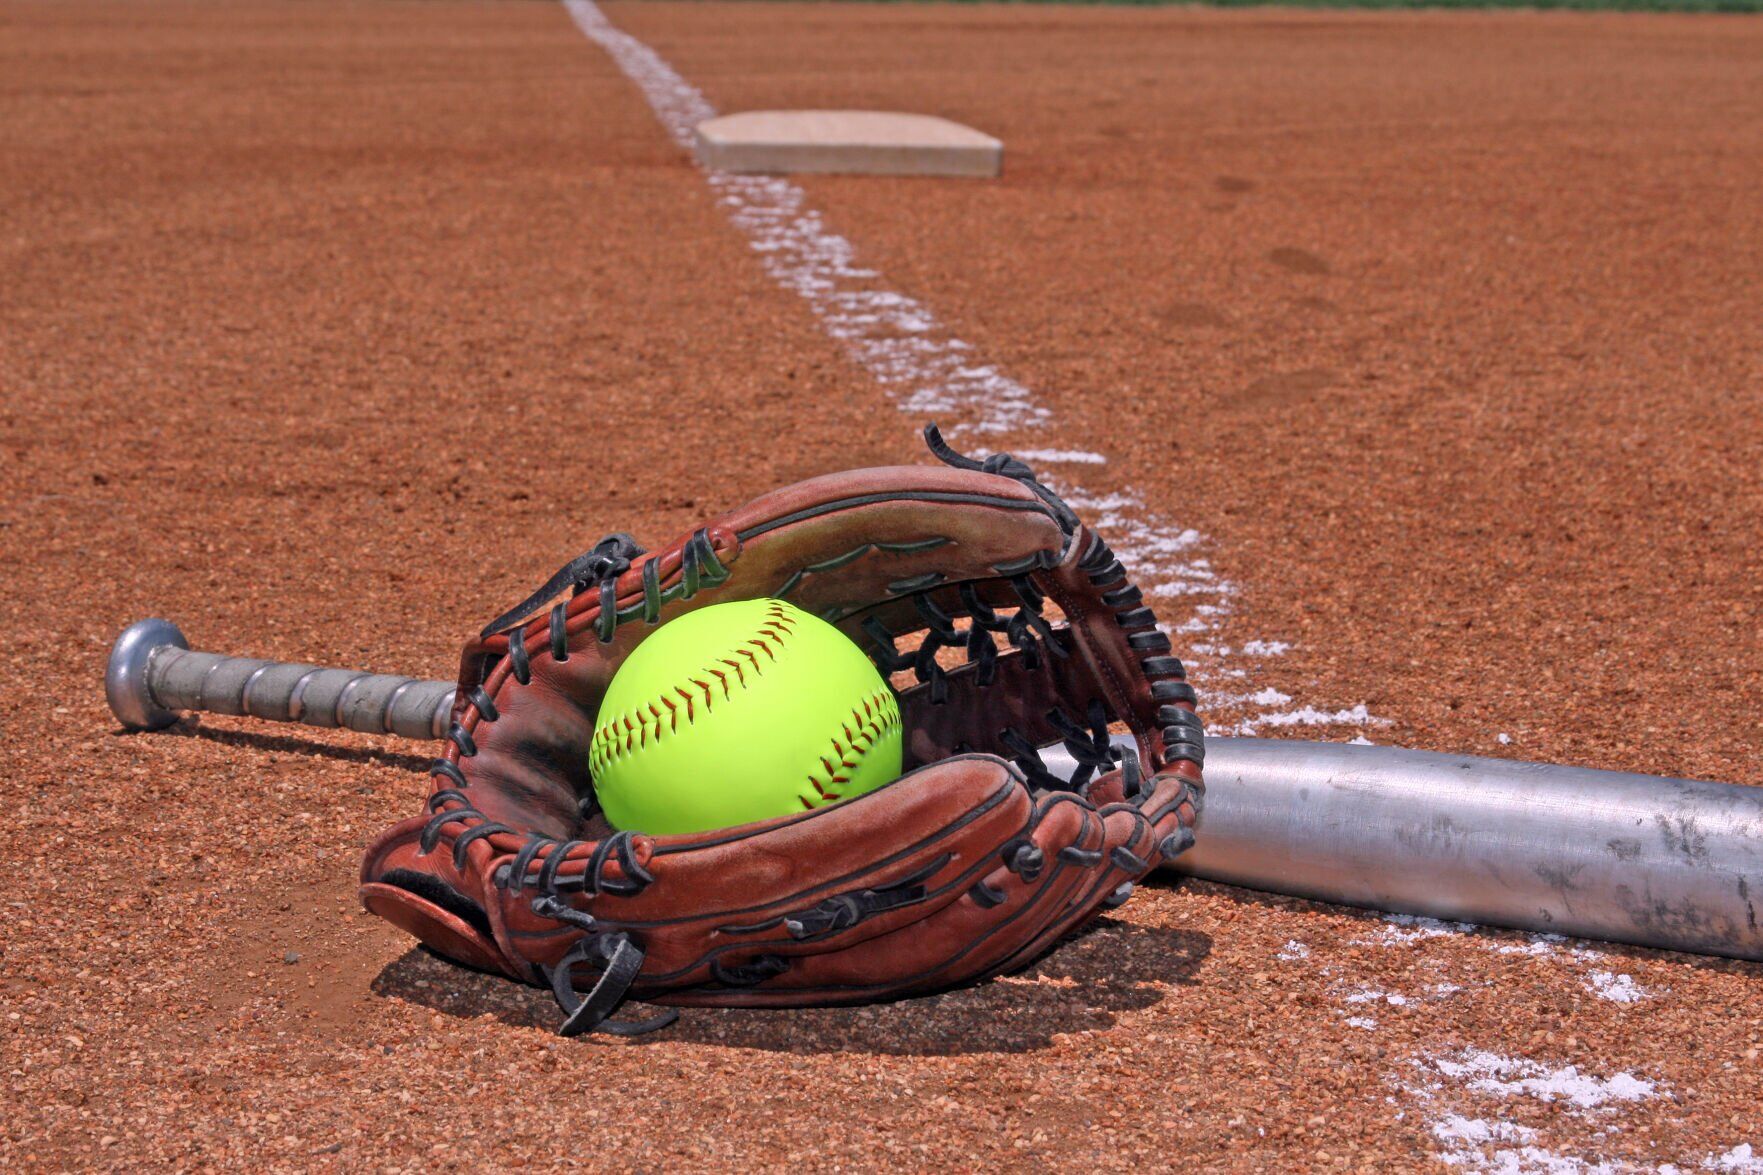 Mount Carmel Softball’s Paige Reuther Shuts Down Acadiana in 10-0 Victory